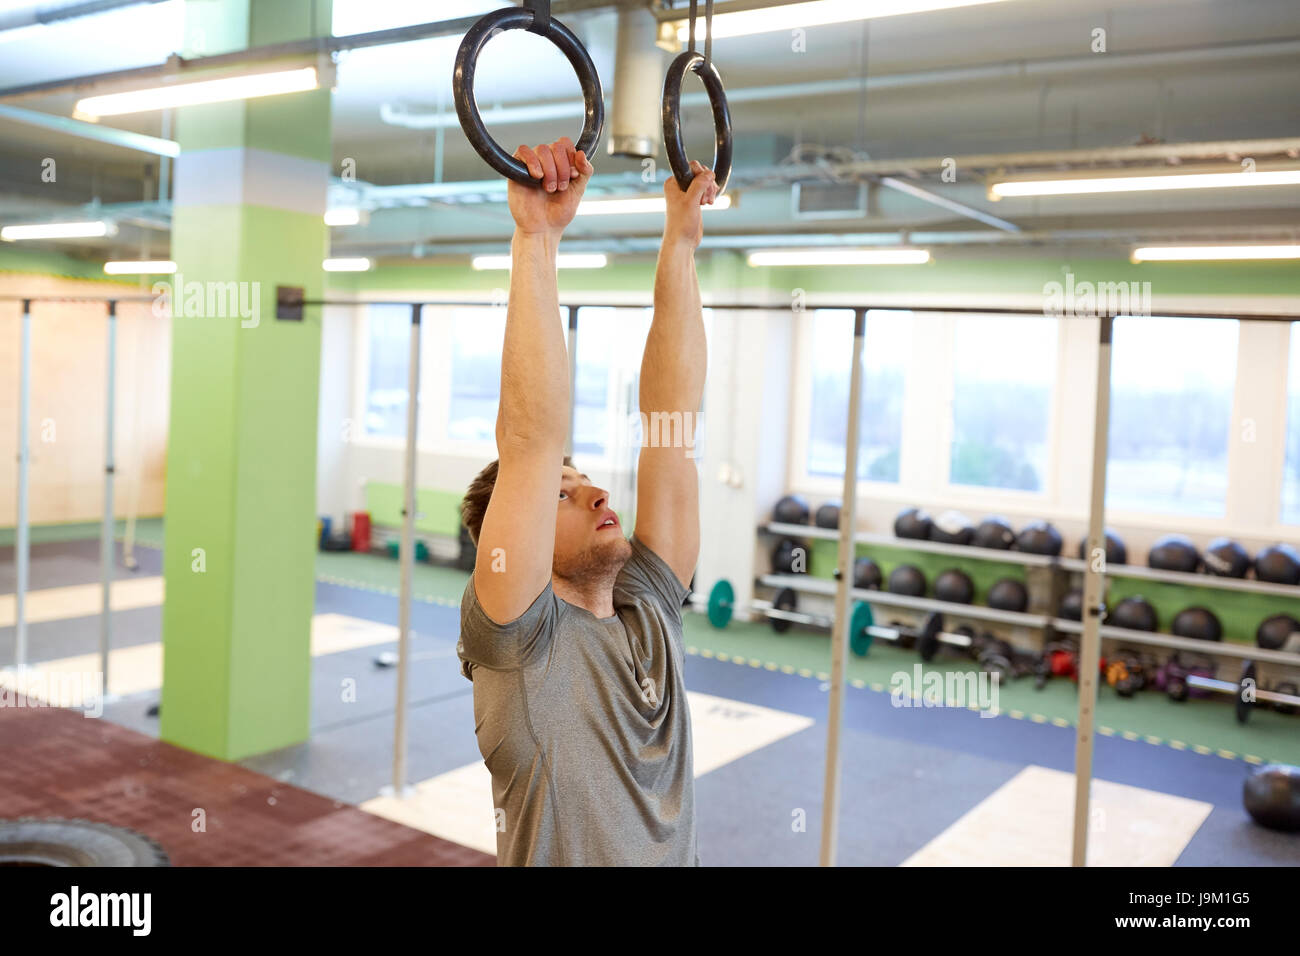 man exercising and doing ring pull-ups in gym Stock Photo